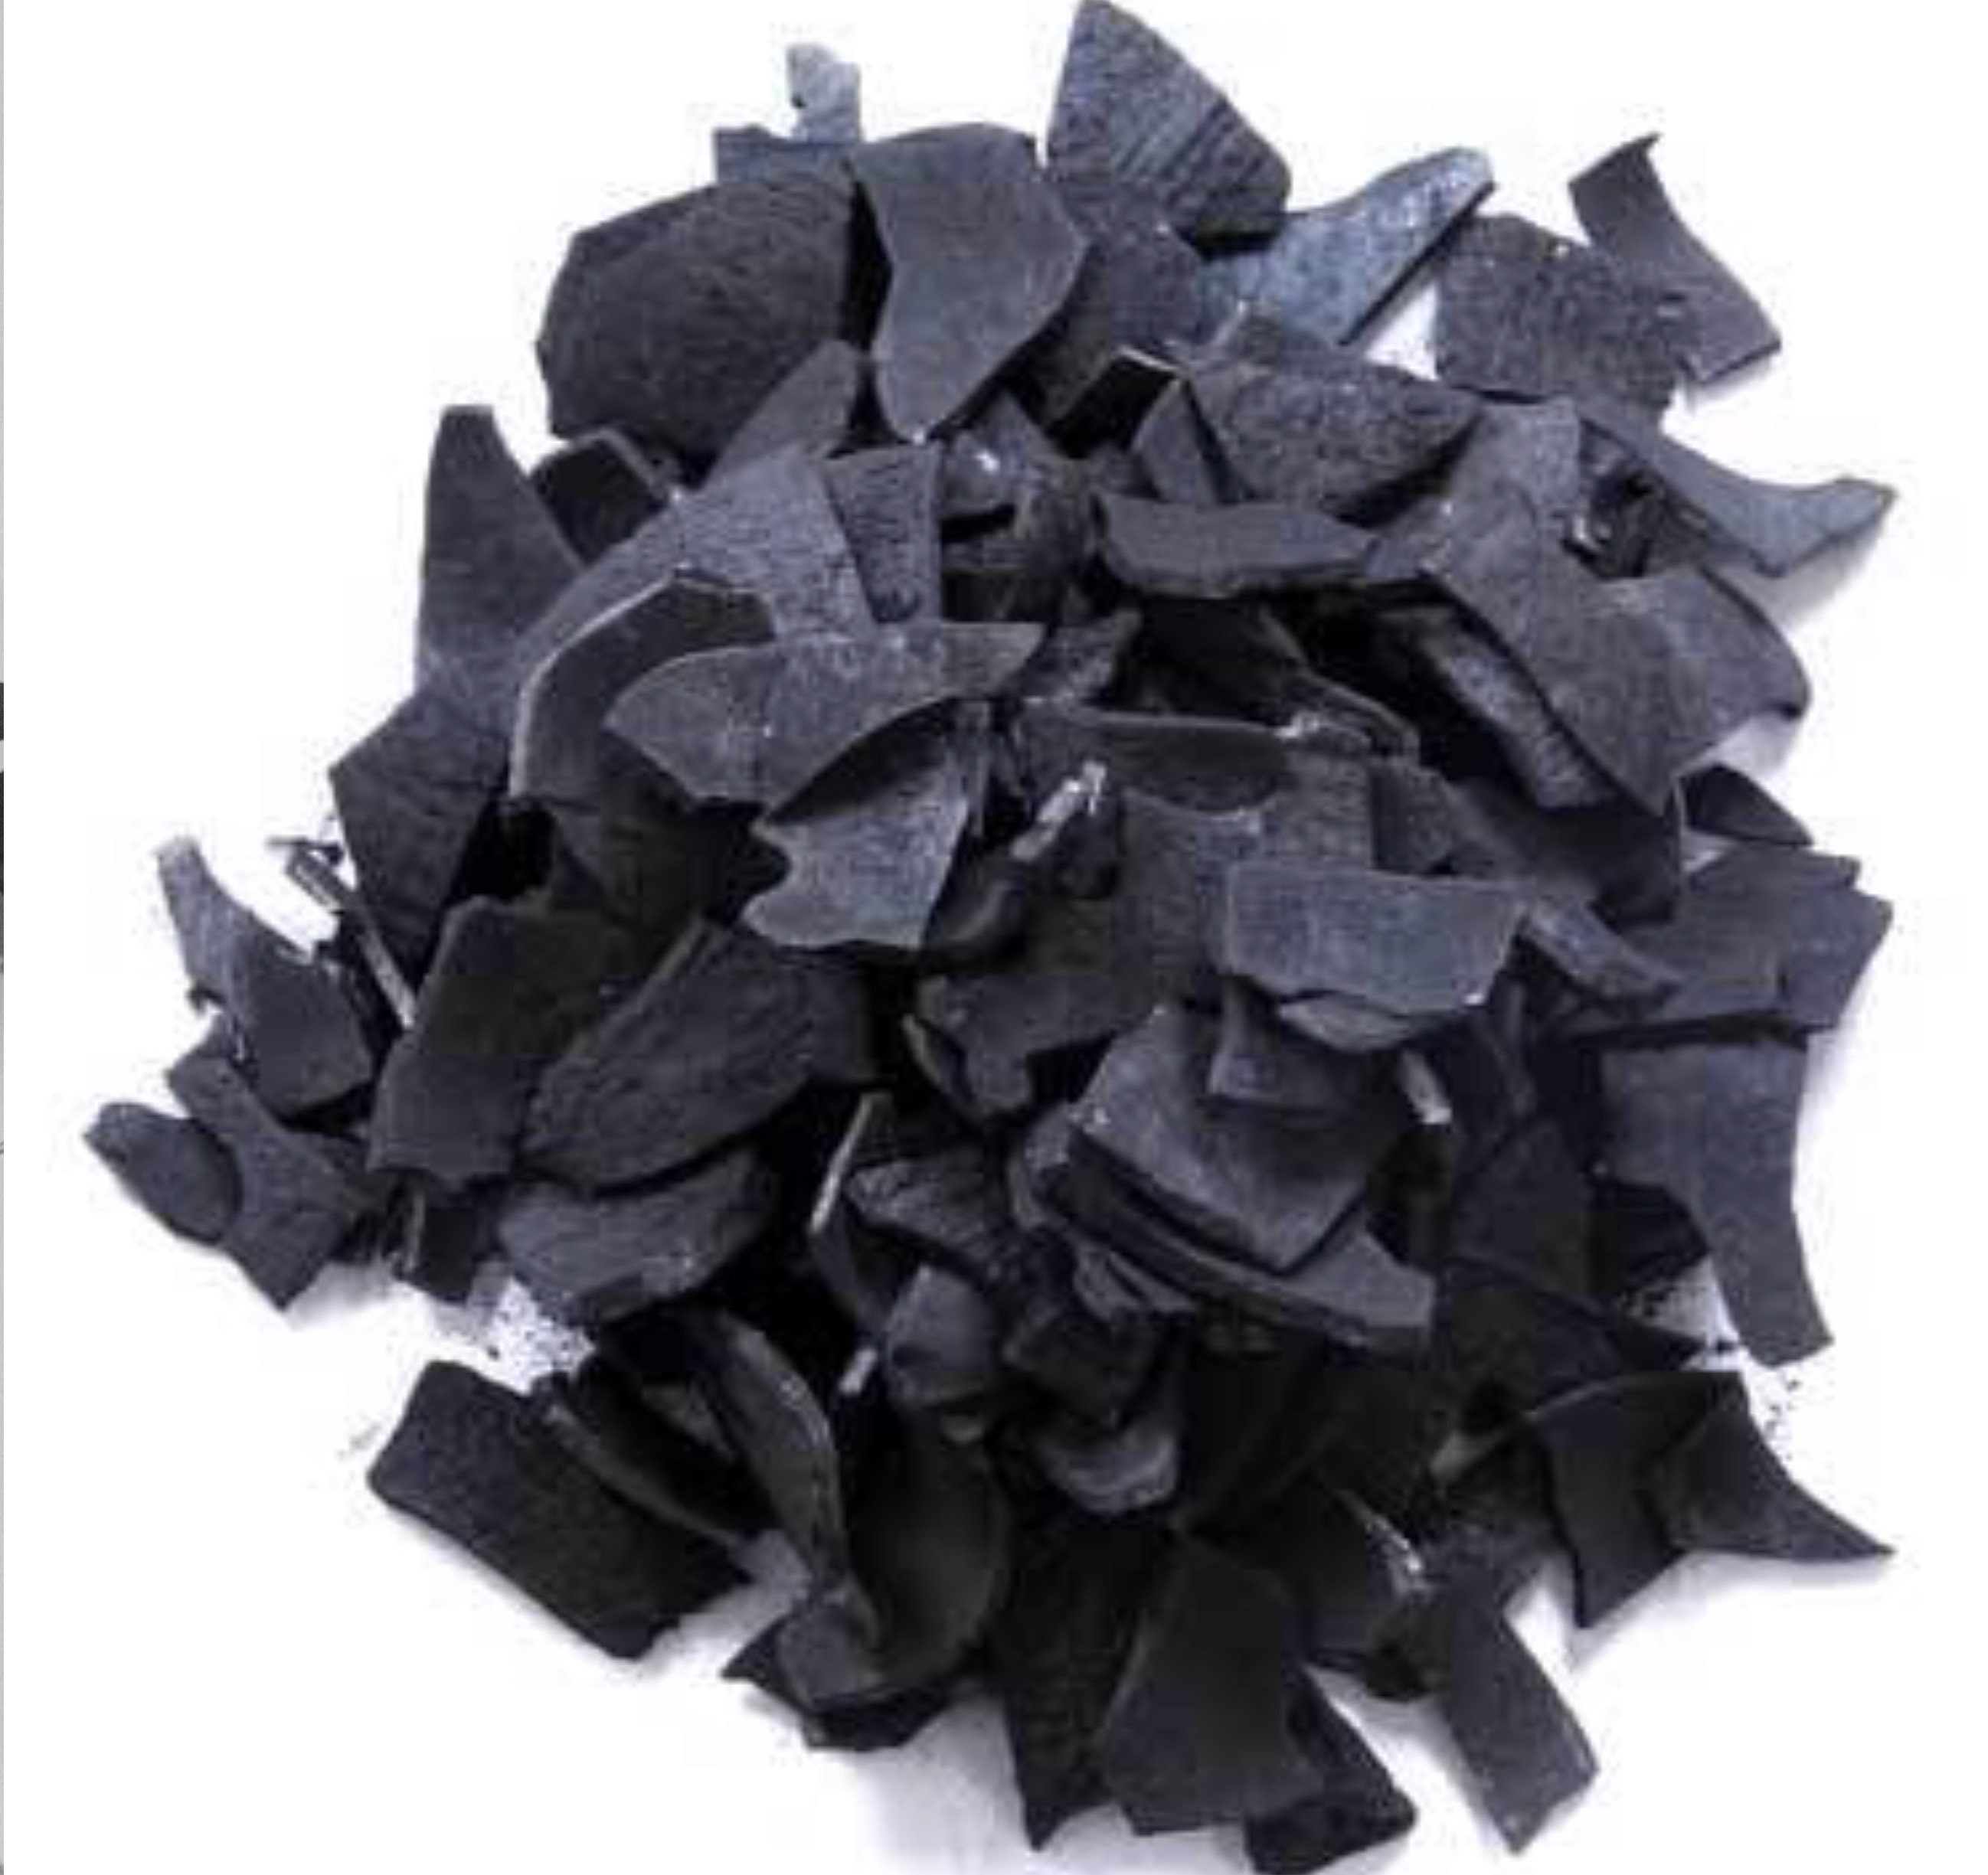 ORGANIC HORTICULTURAL GRADE COCONUT HUSK CHARCOAL MADE FROM COCONUT SHELLS 